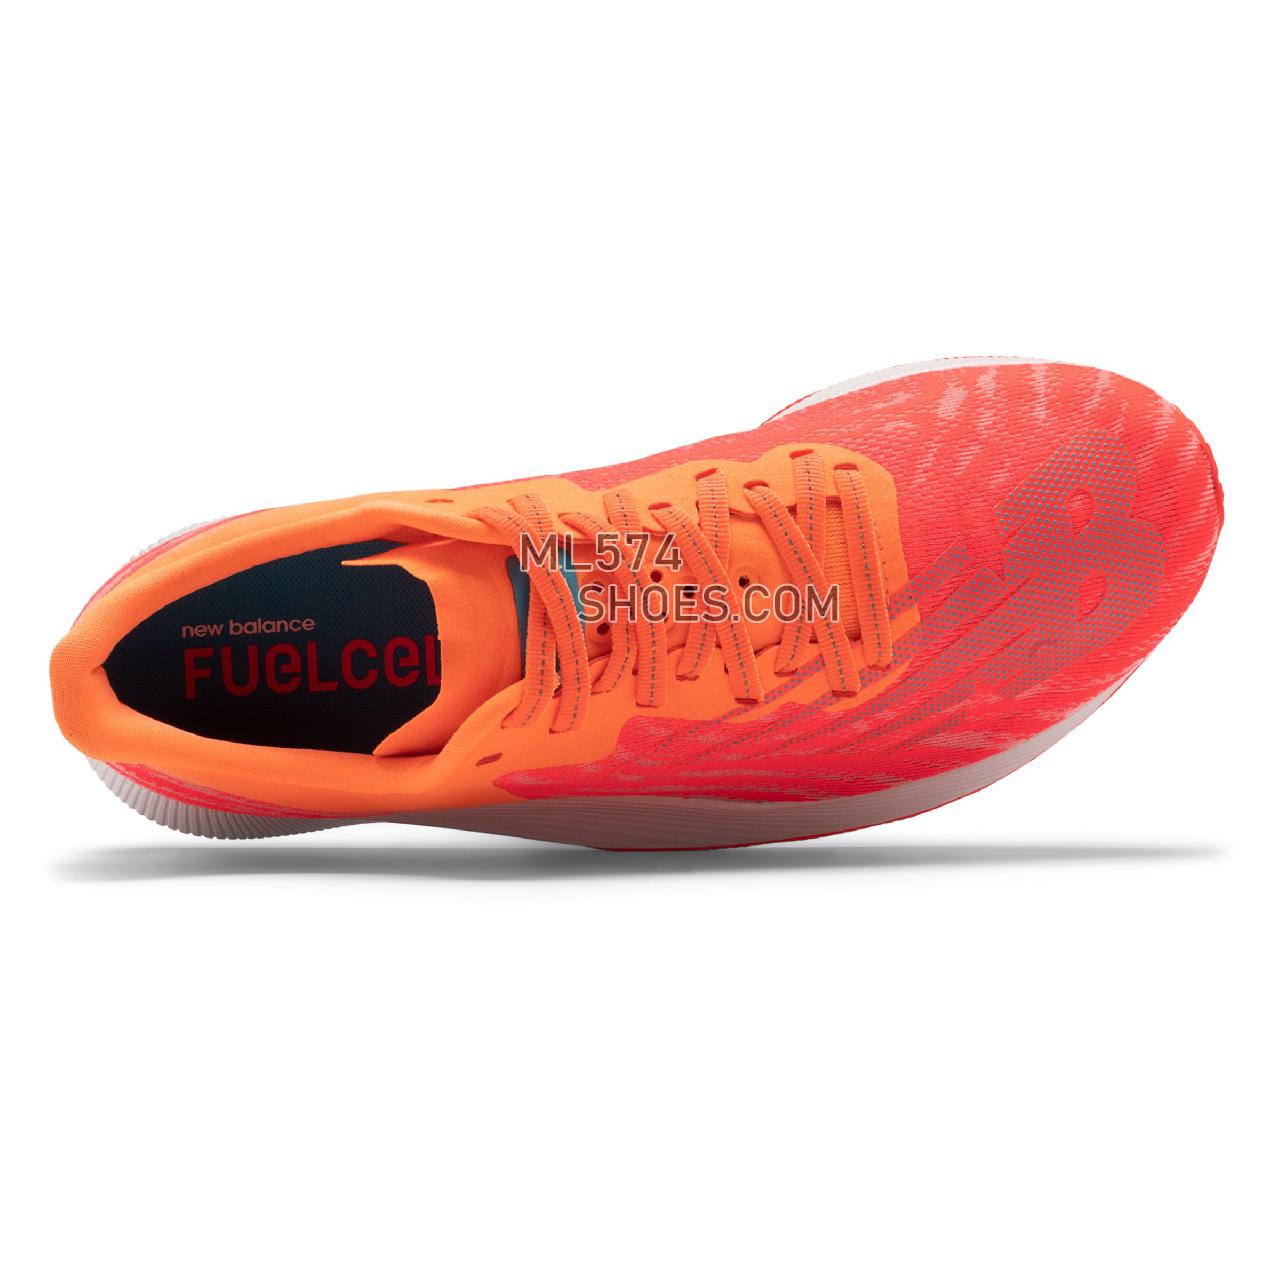 New Balance Fuelcell TC - Women's Classic Sneakers - Vivid Coral with Citrus Punch and Virtual Sky - WRCXVC1